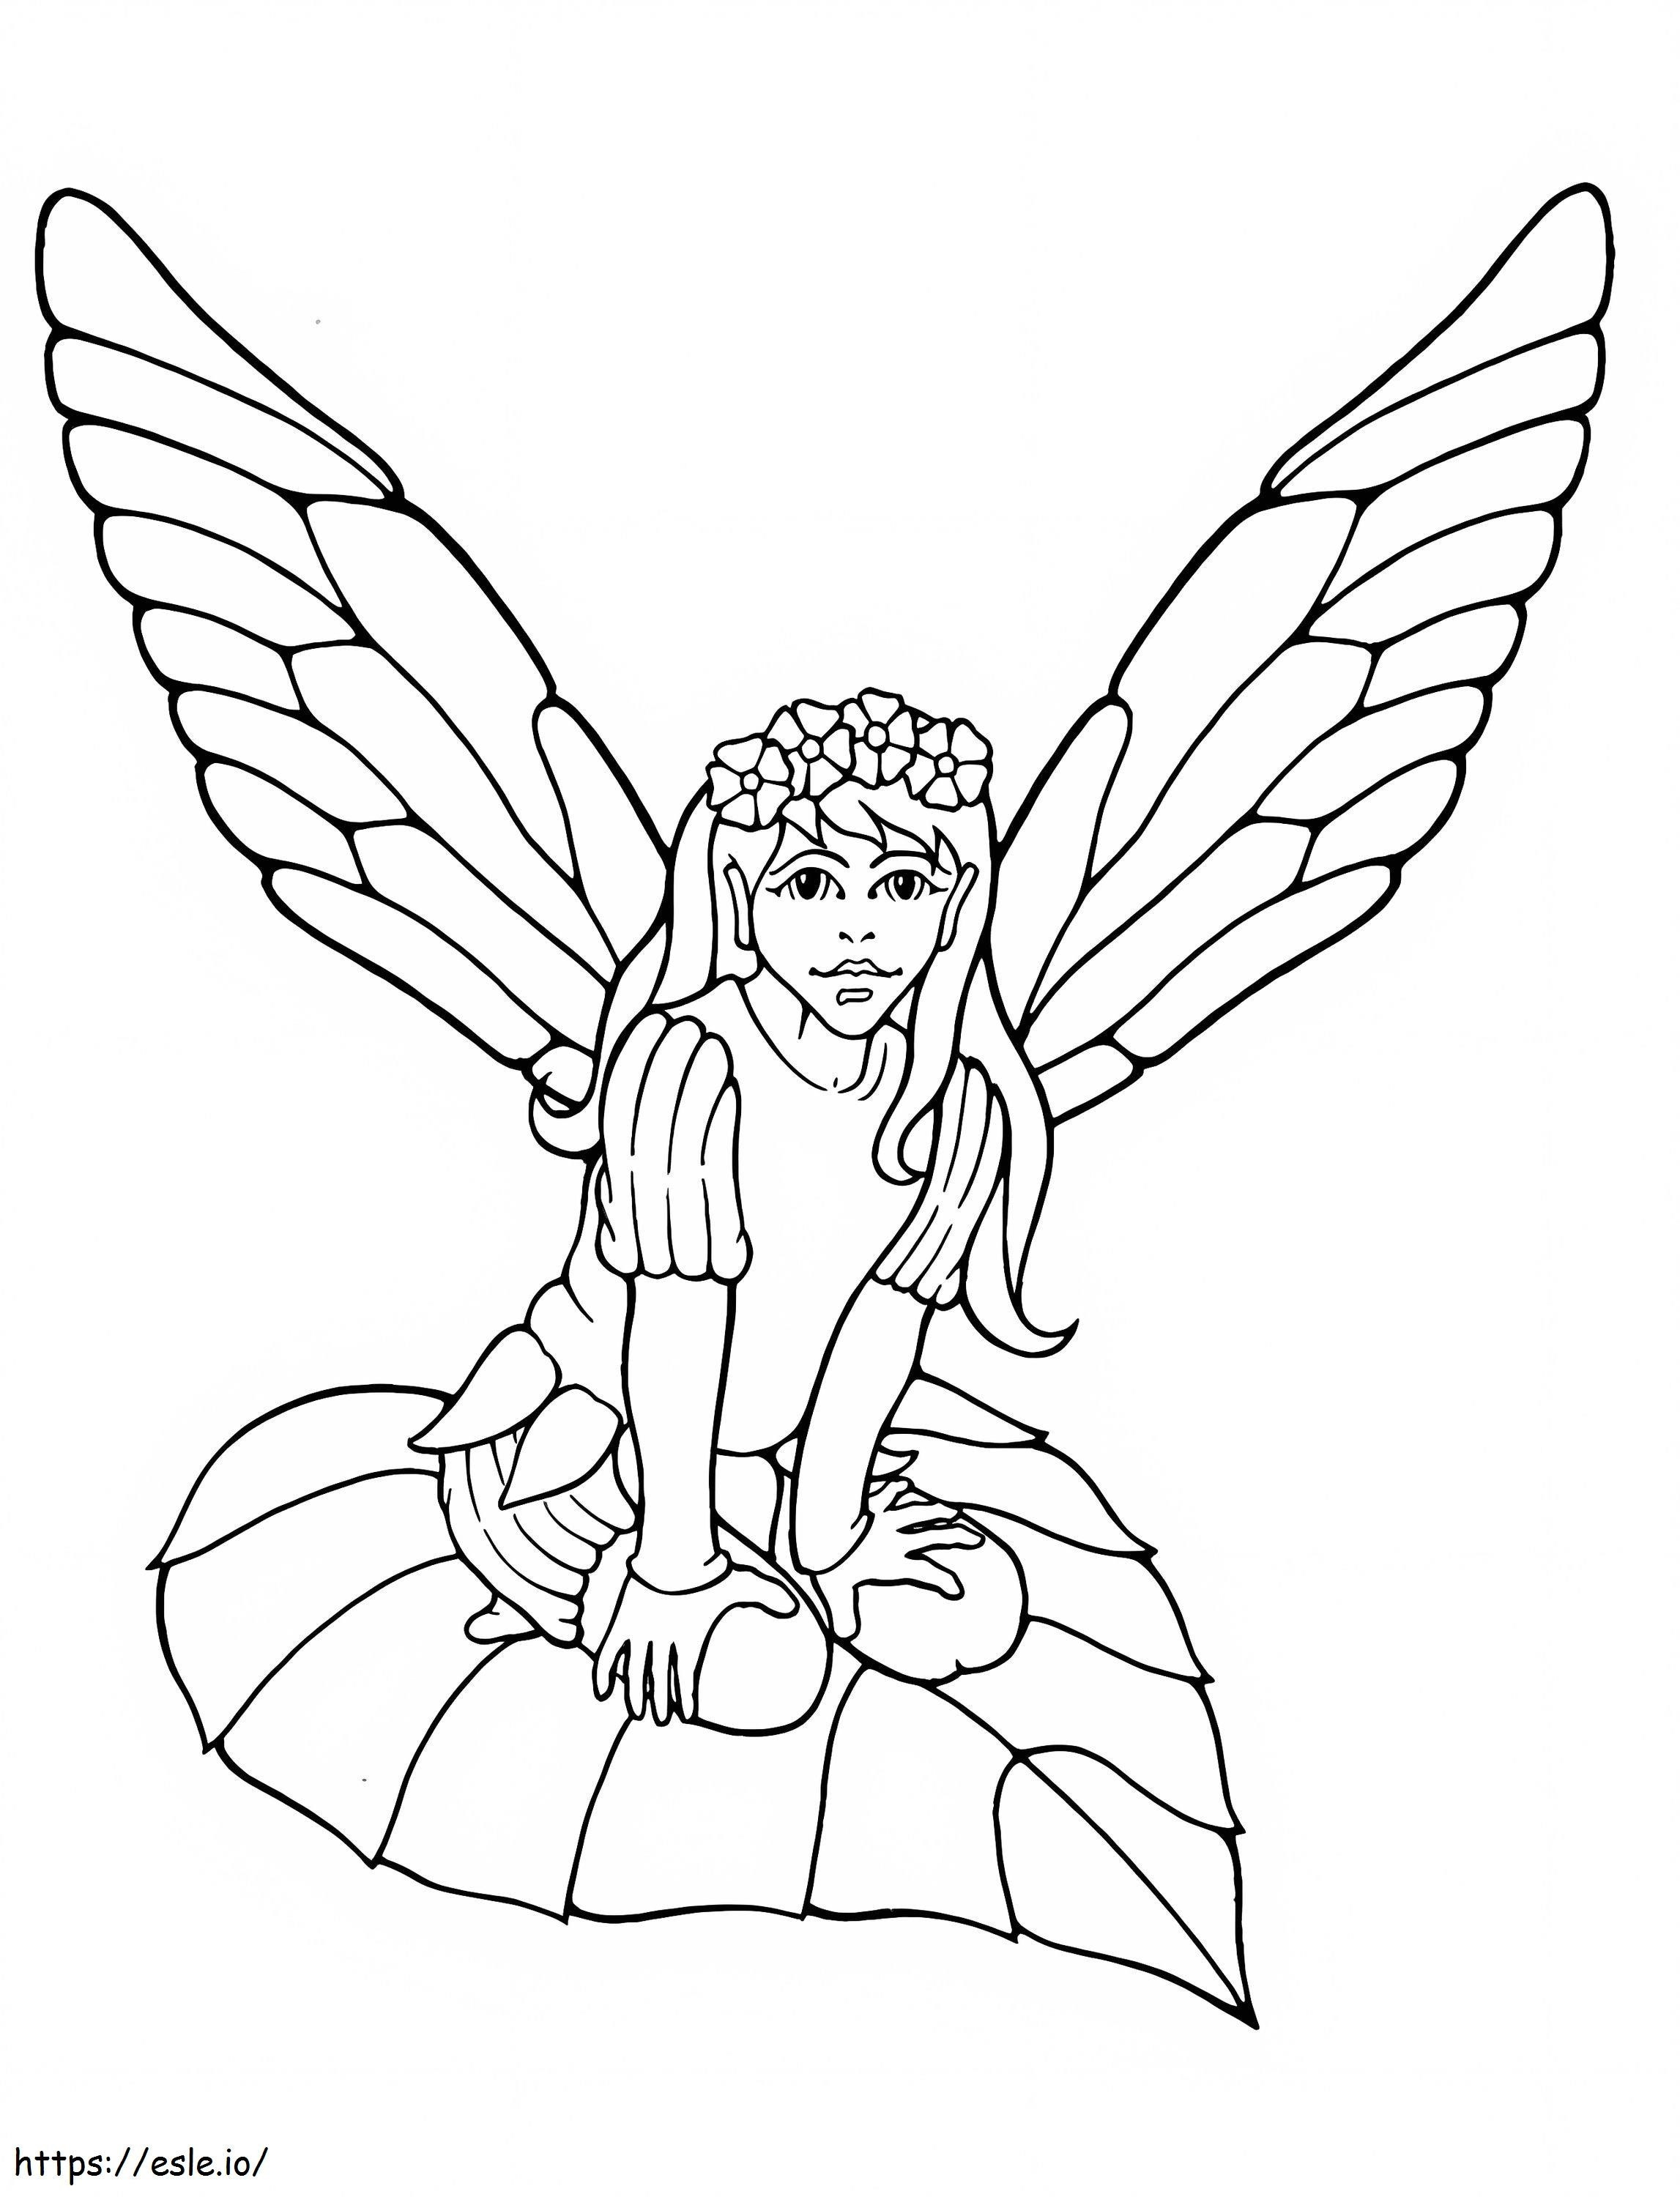 Fairy Sitting On Leaf coloring page